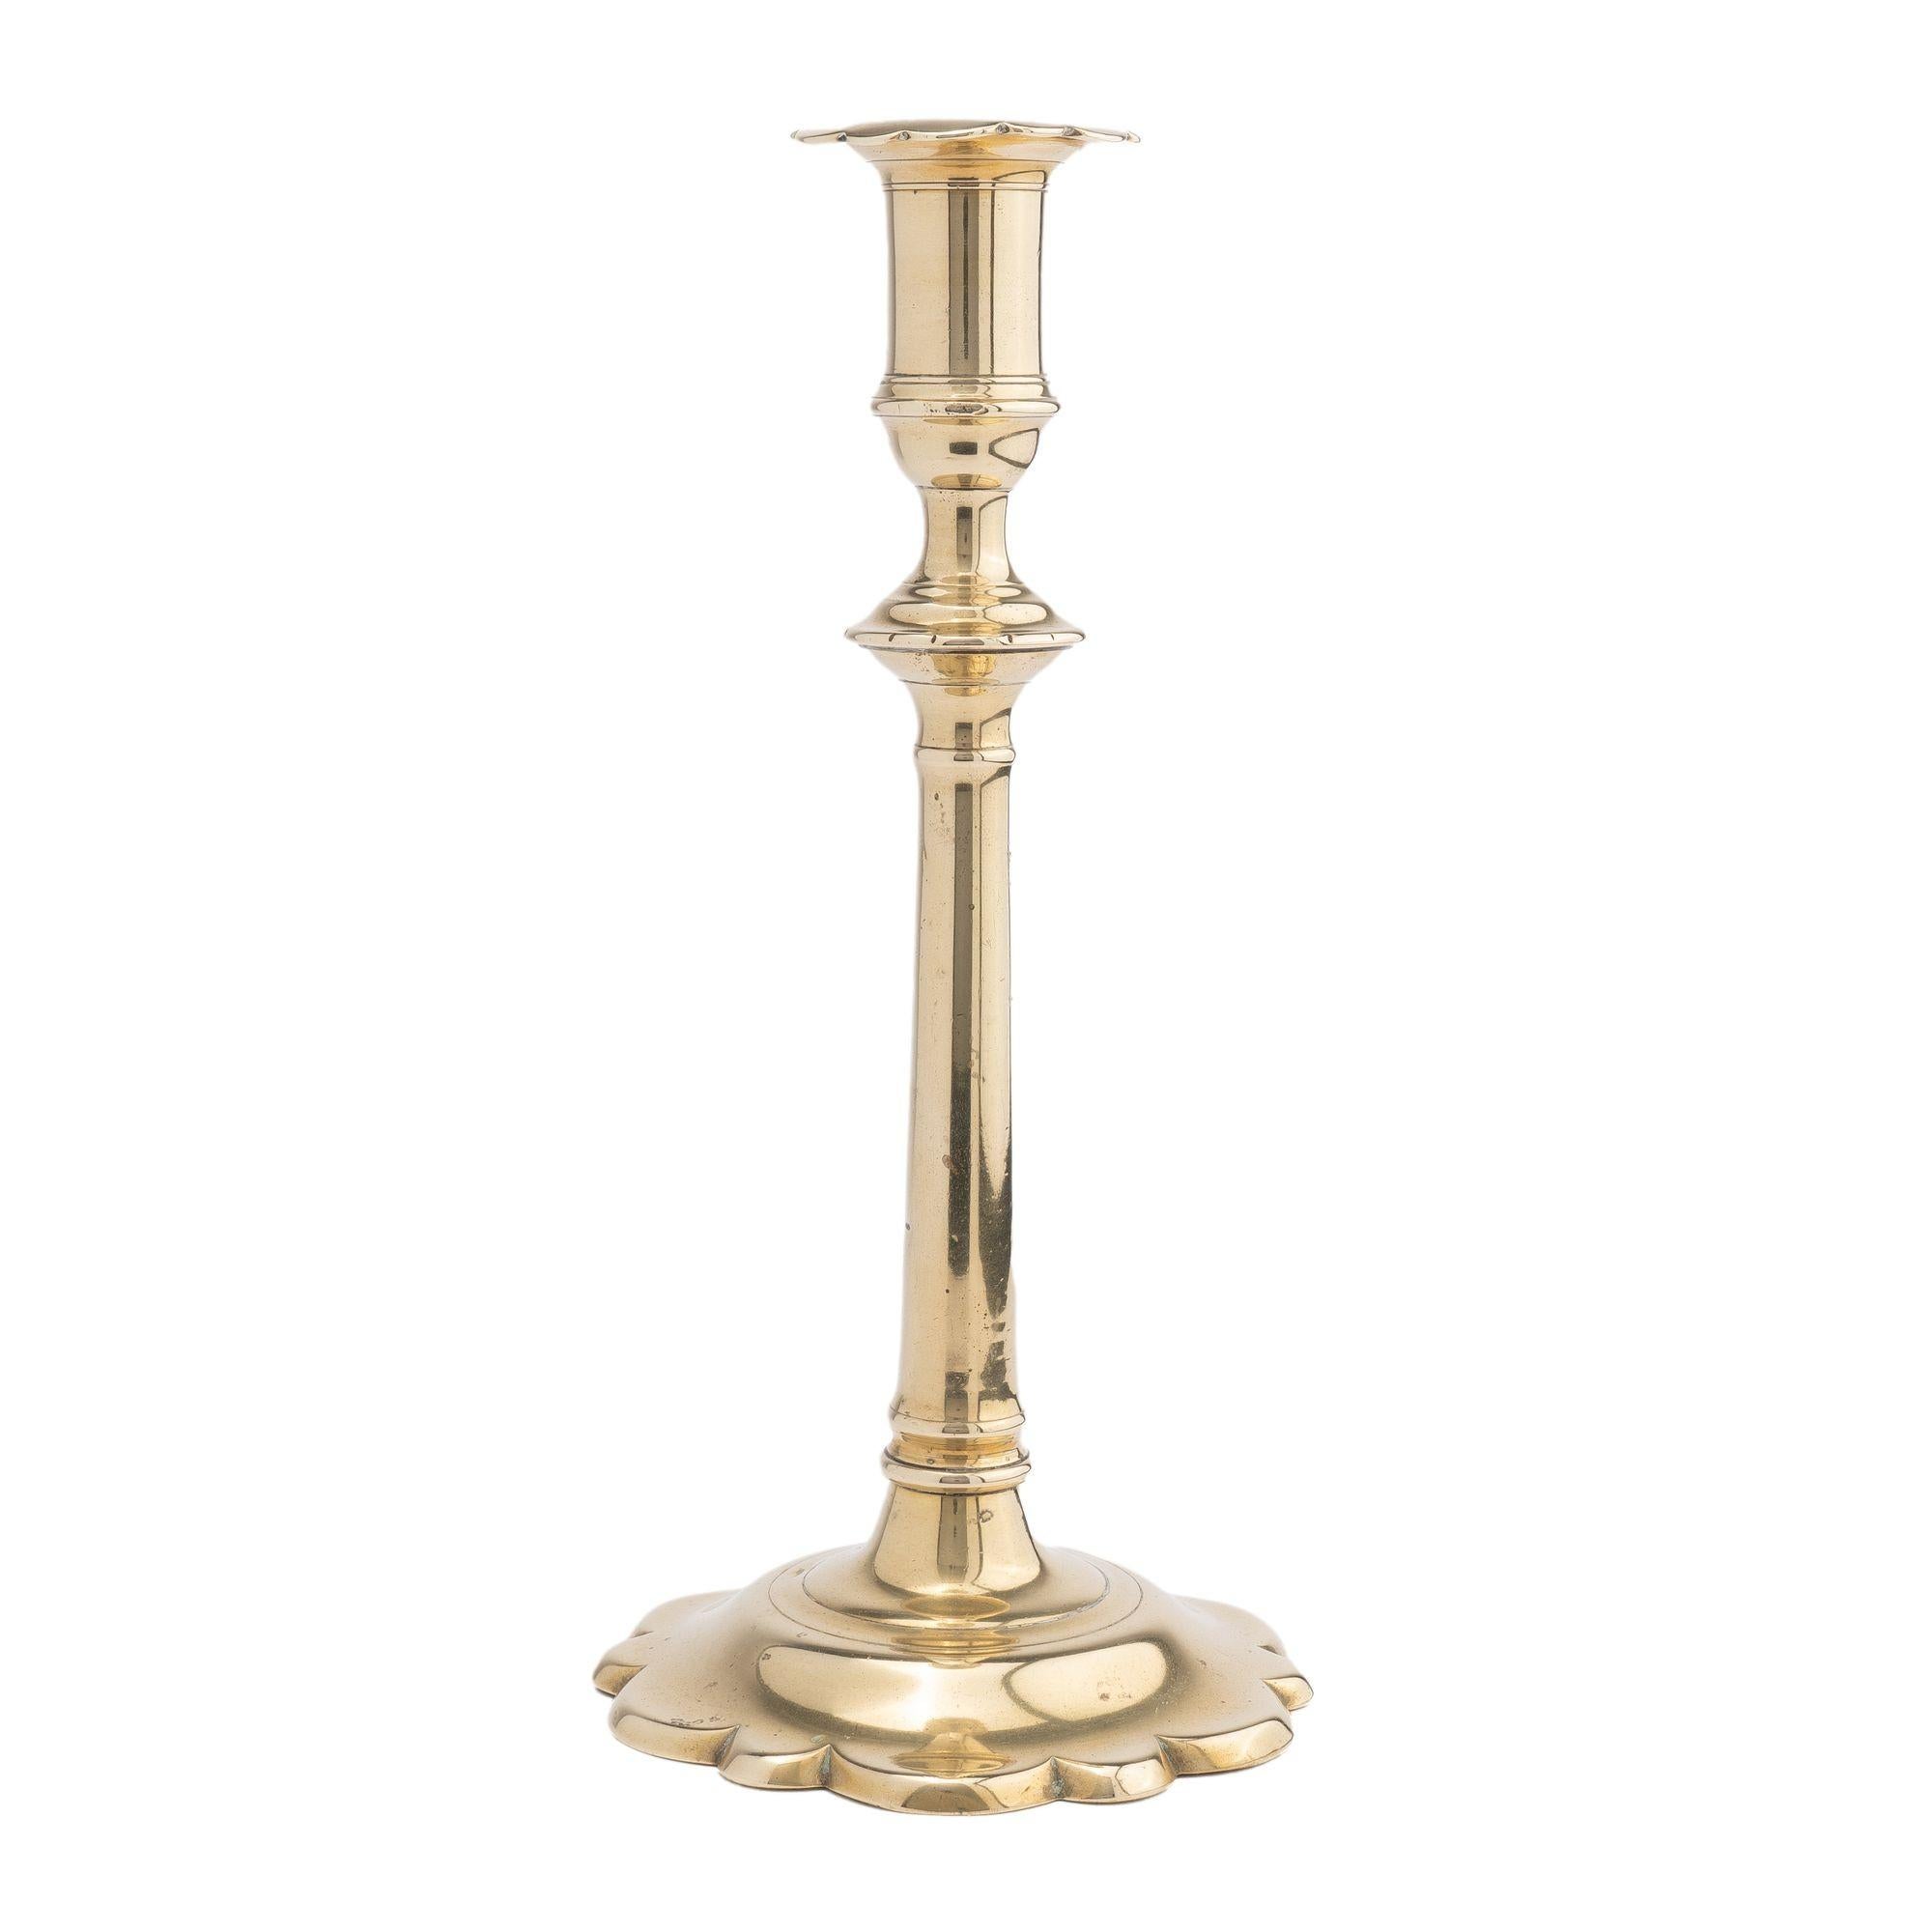 Cast brass Georgian candlestick with scolloped base and matching scolloped edge bobesh.

England, circa 1770.